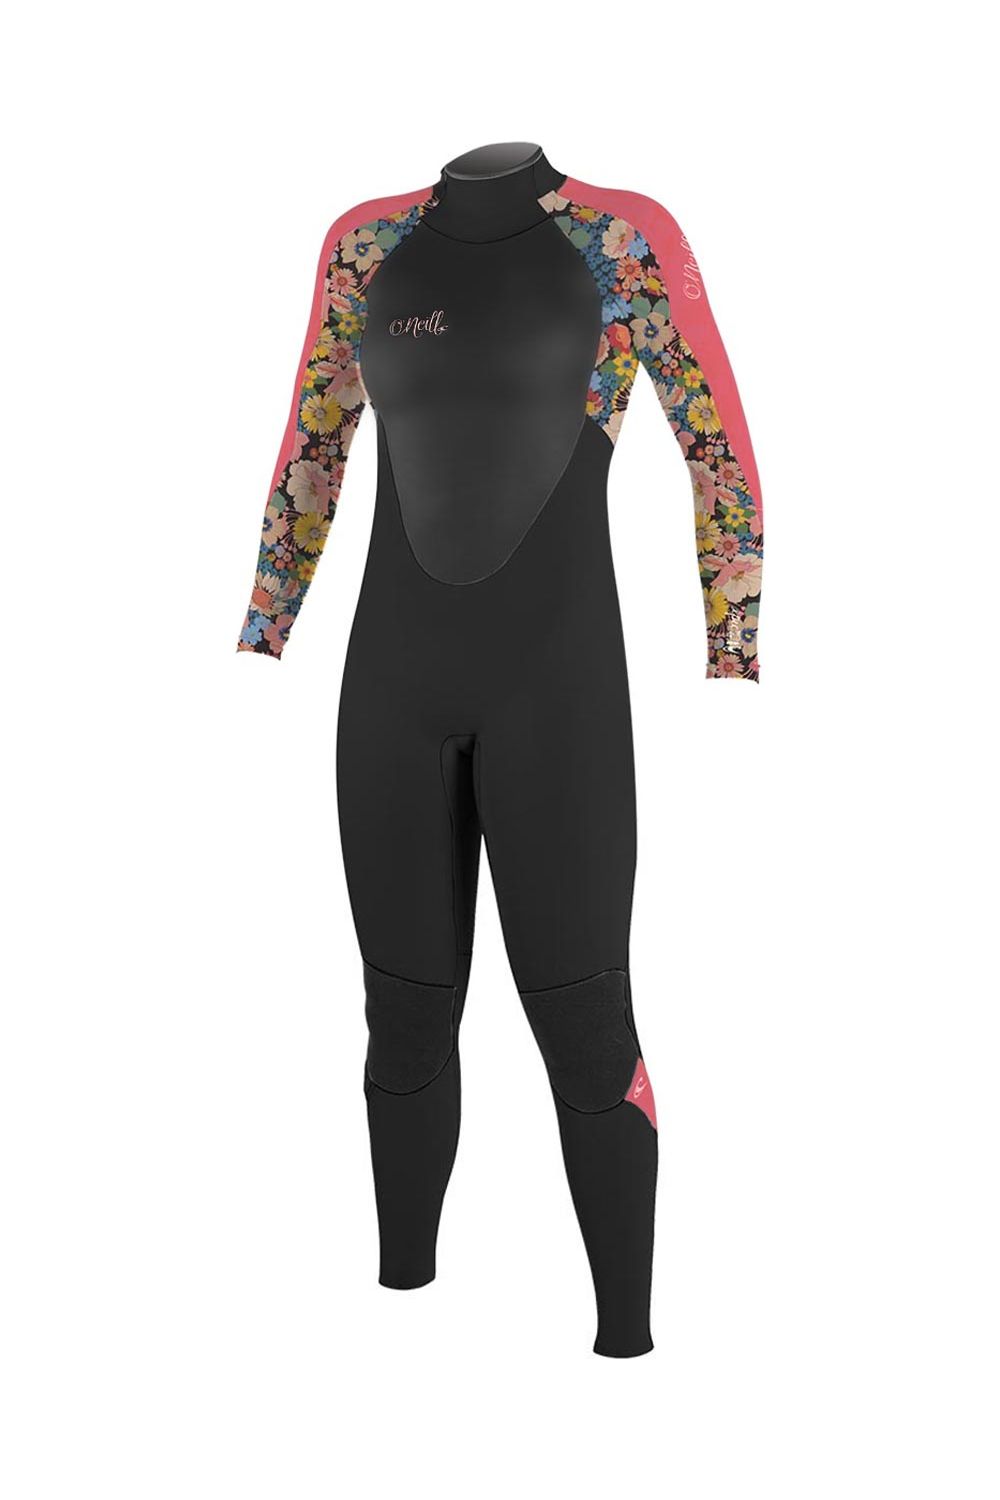 O'Neill Epic Girls Wetsuit 5/4 With Back Zip In Full Black Twiggy Tea Rose